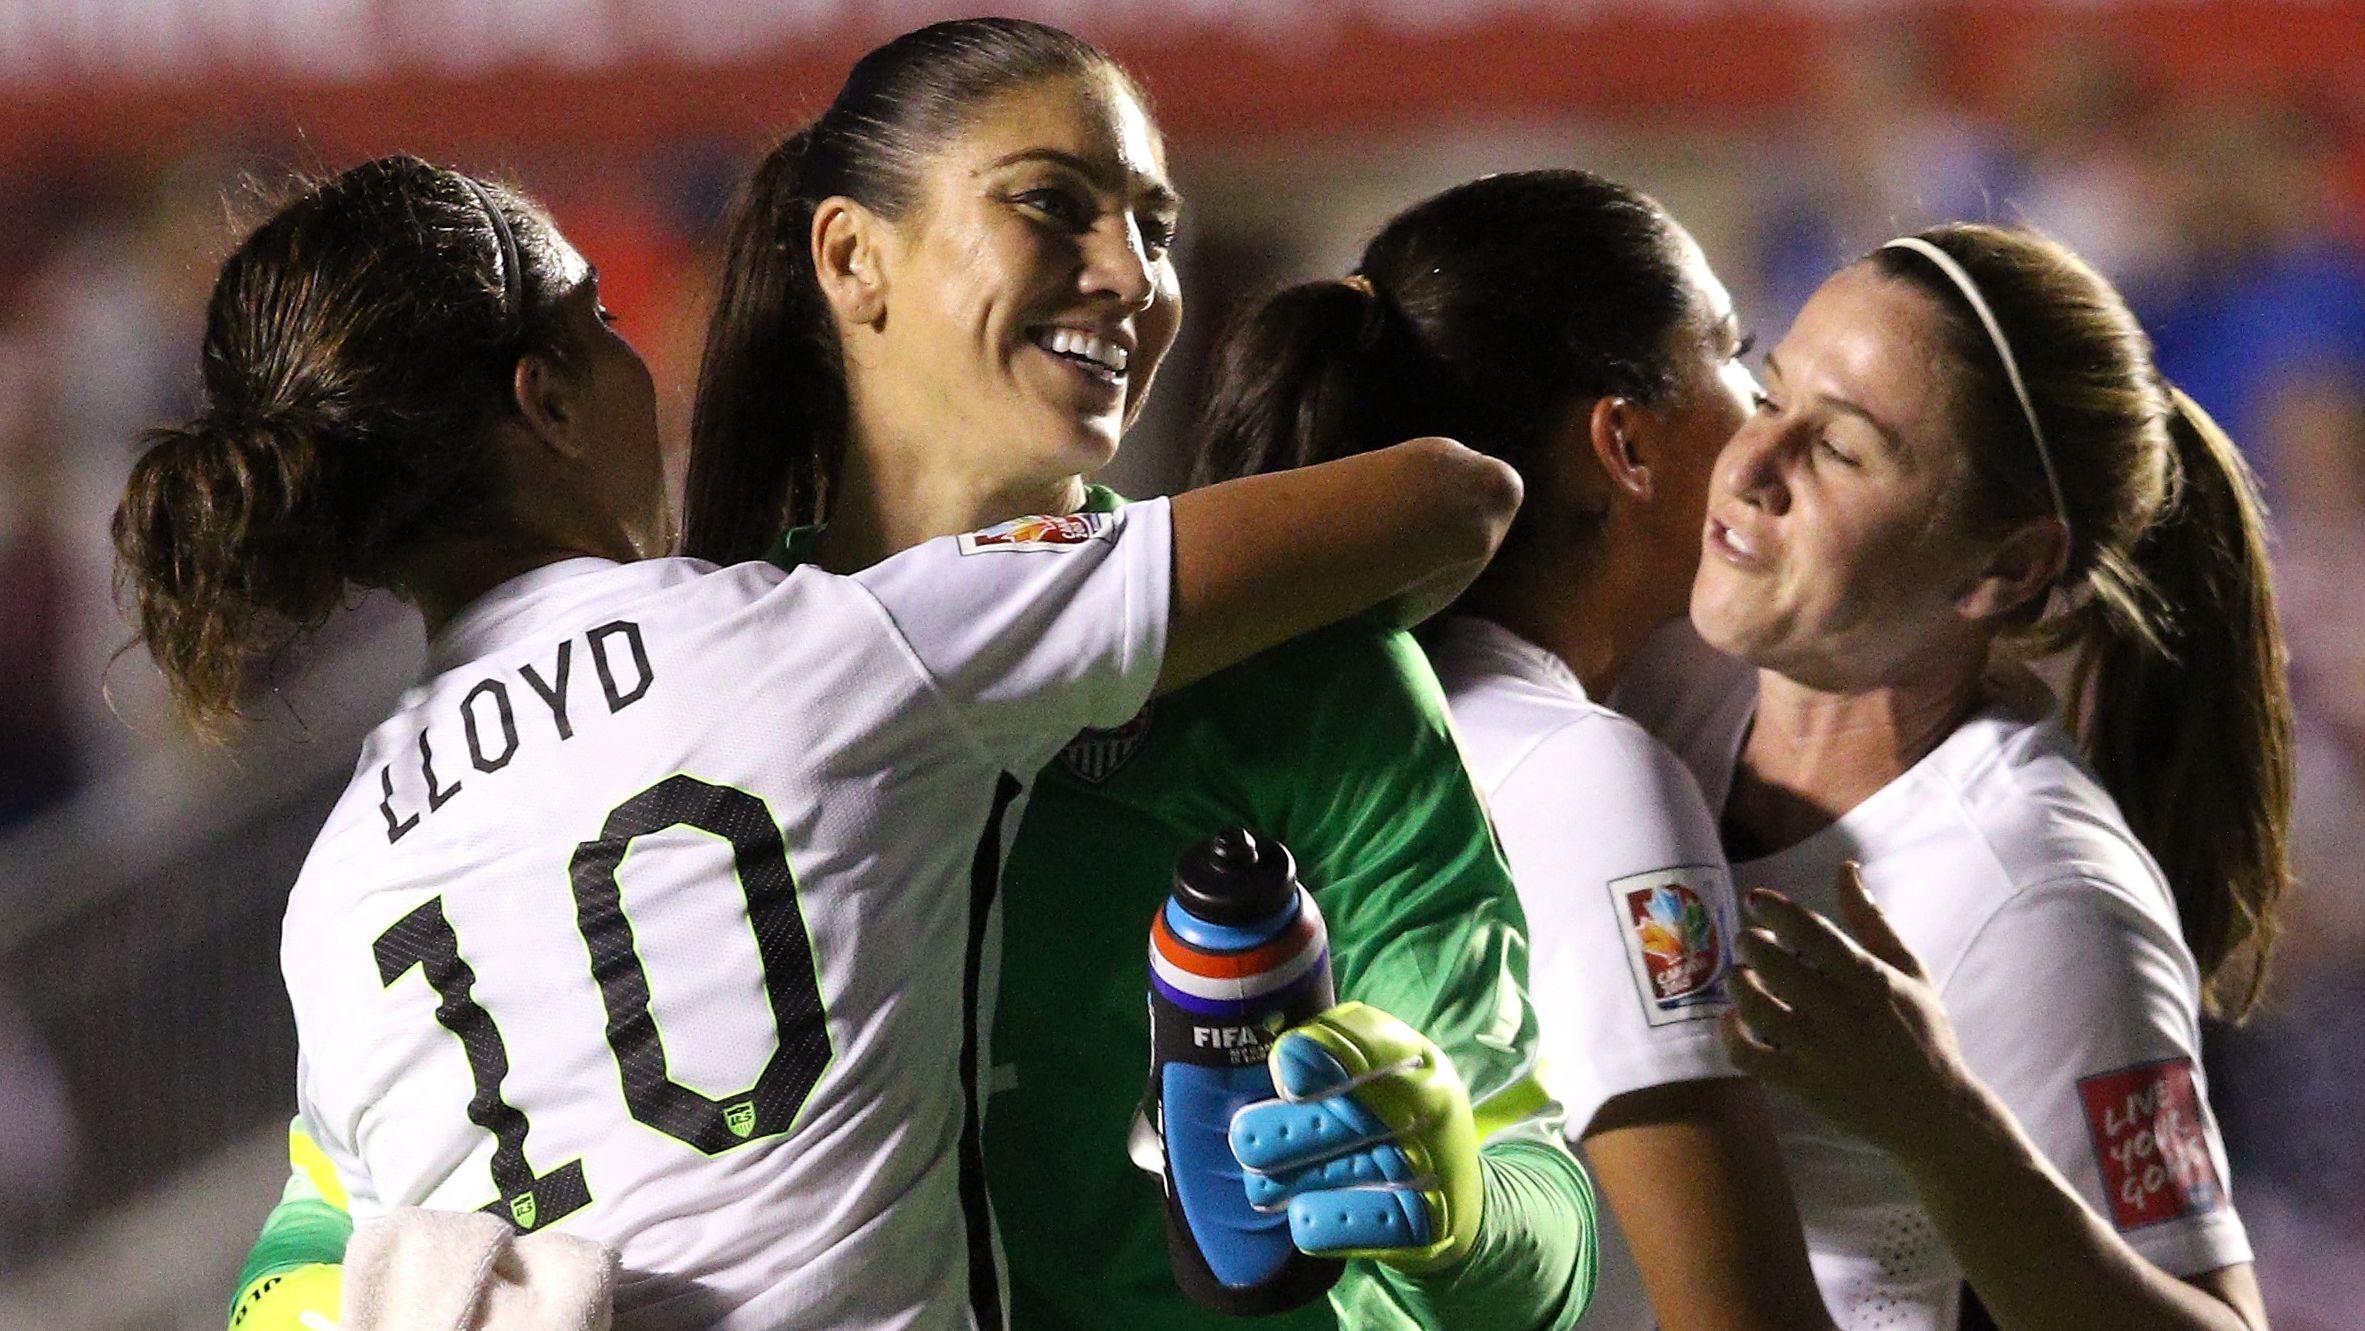  Hope Solo celebrates with Carli Lloyd after defeating China 1-0 in the FIFA Women's World Cup 2015 Quarter Final match in June 2015.